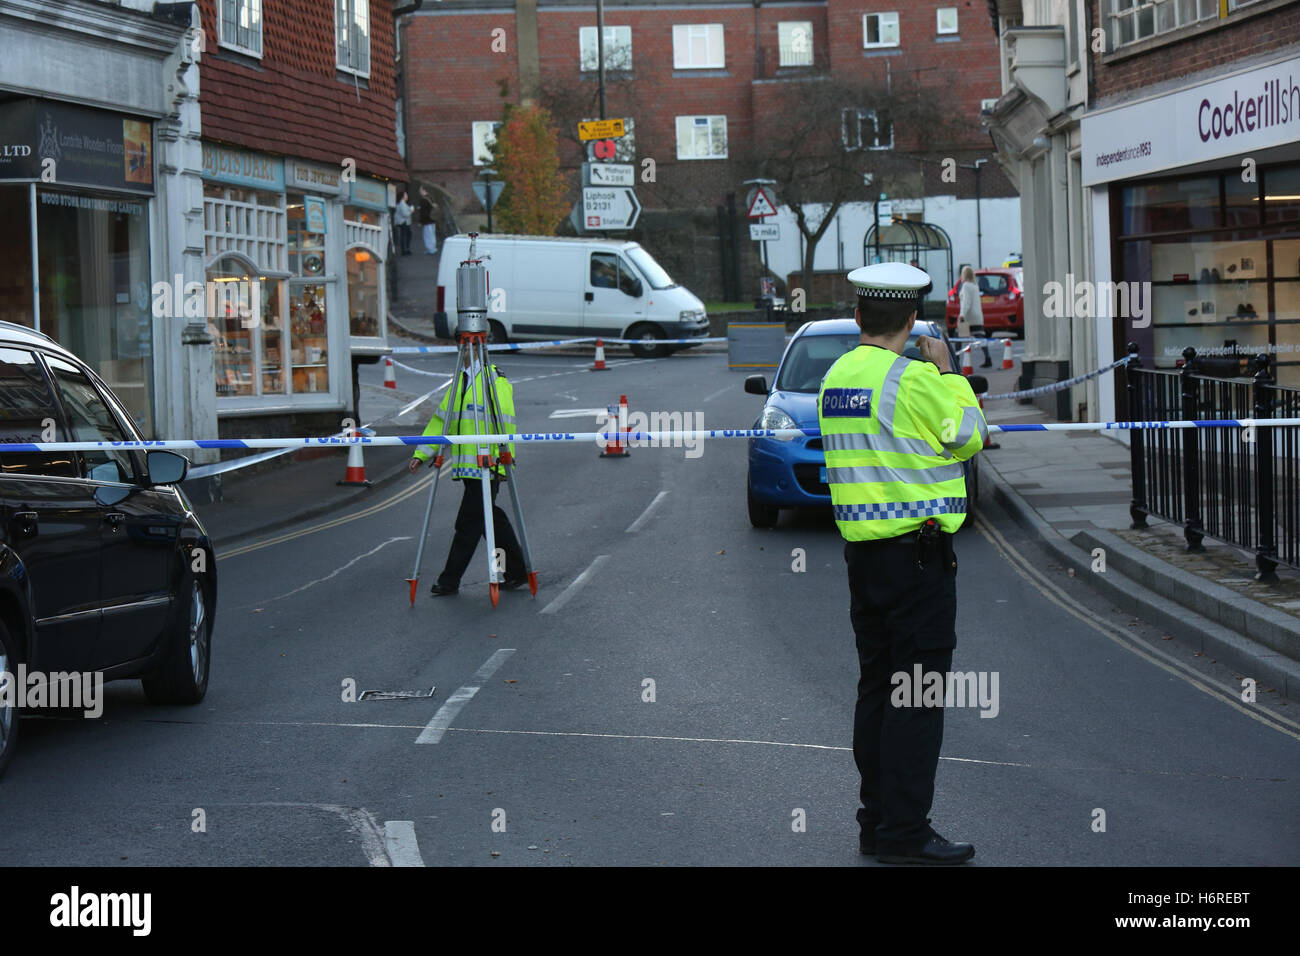 Haslemere, Surrey, UK. 31st October, 2016. A man in his 80’s  has been airlifted to  hospital following a serious collision  in Haslemere. Surrey Police have  confirmed  a man in his 80s has been taken to St George’s Hospital with serious head injuries.  It is believed  that moments before the man had been out shopping for shoes in the near by Cockerill Shoes. Staff who witnesses the incident ran  with first aid kits to offer assistance  before the arrival of the emergency services. Credit:  uknip/Alamy Live News Stock Photo